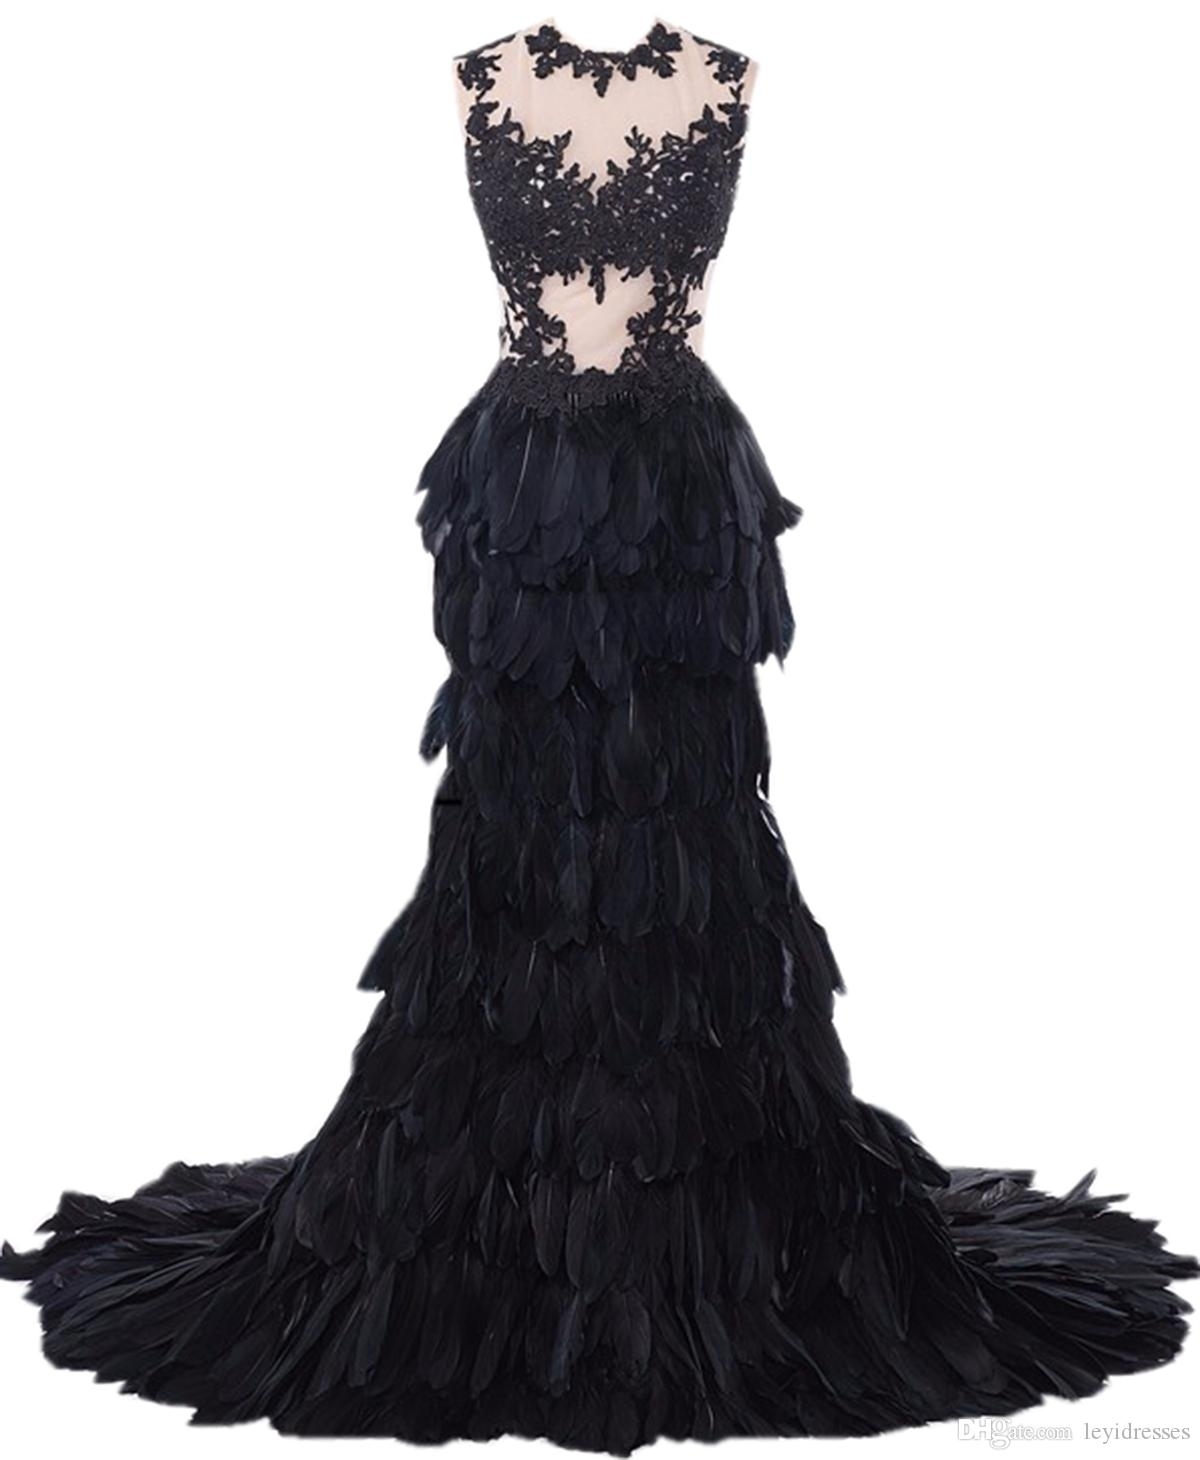 Gothic Wedding Dresses You Ll Love In 2021 Visualhunt